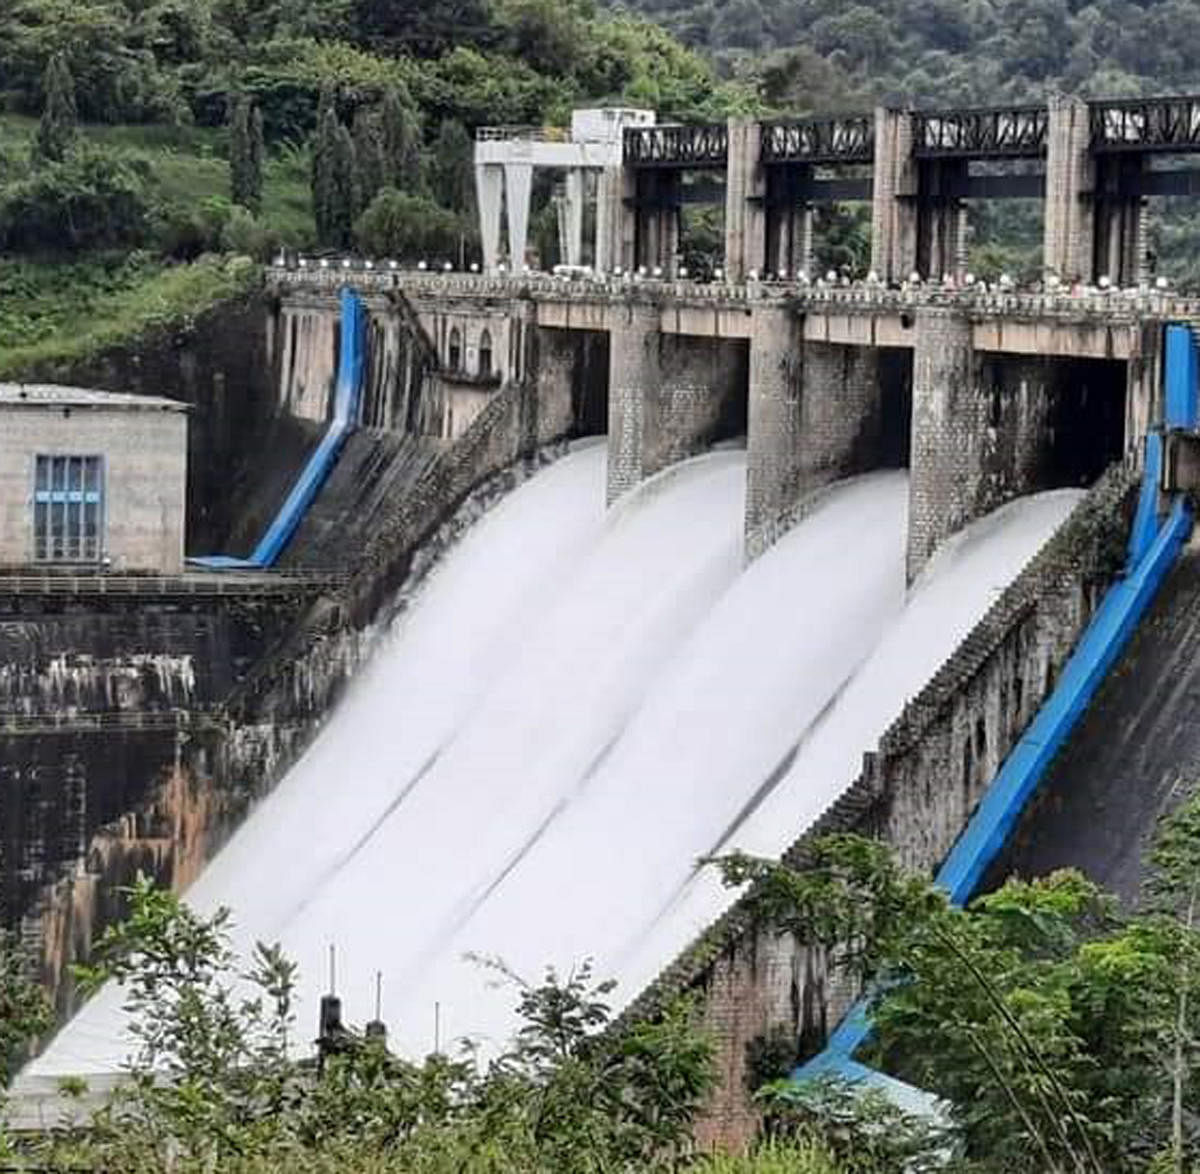 Water has been released to the canal from Bhadra reservoir in Lakkavalli of Tarikere. Credit: DH Photo